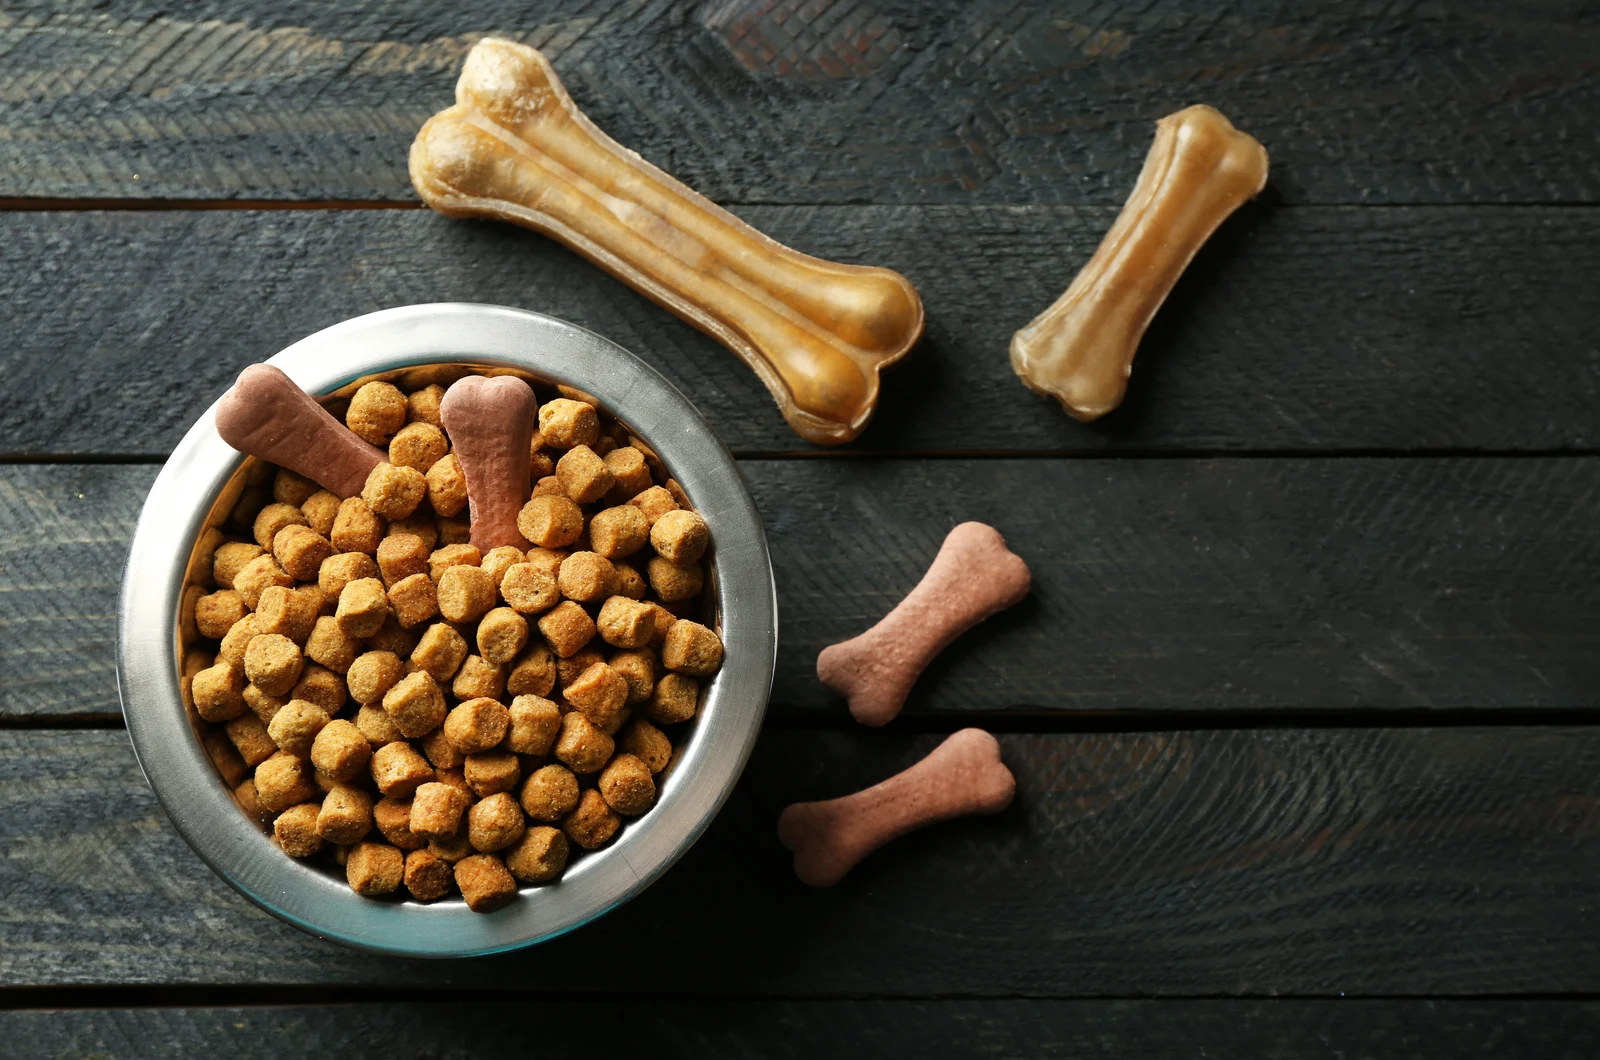 grey background and bowl with dog food